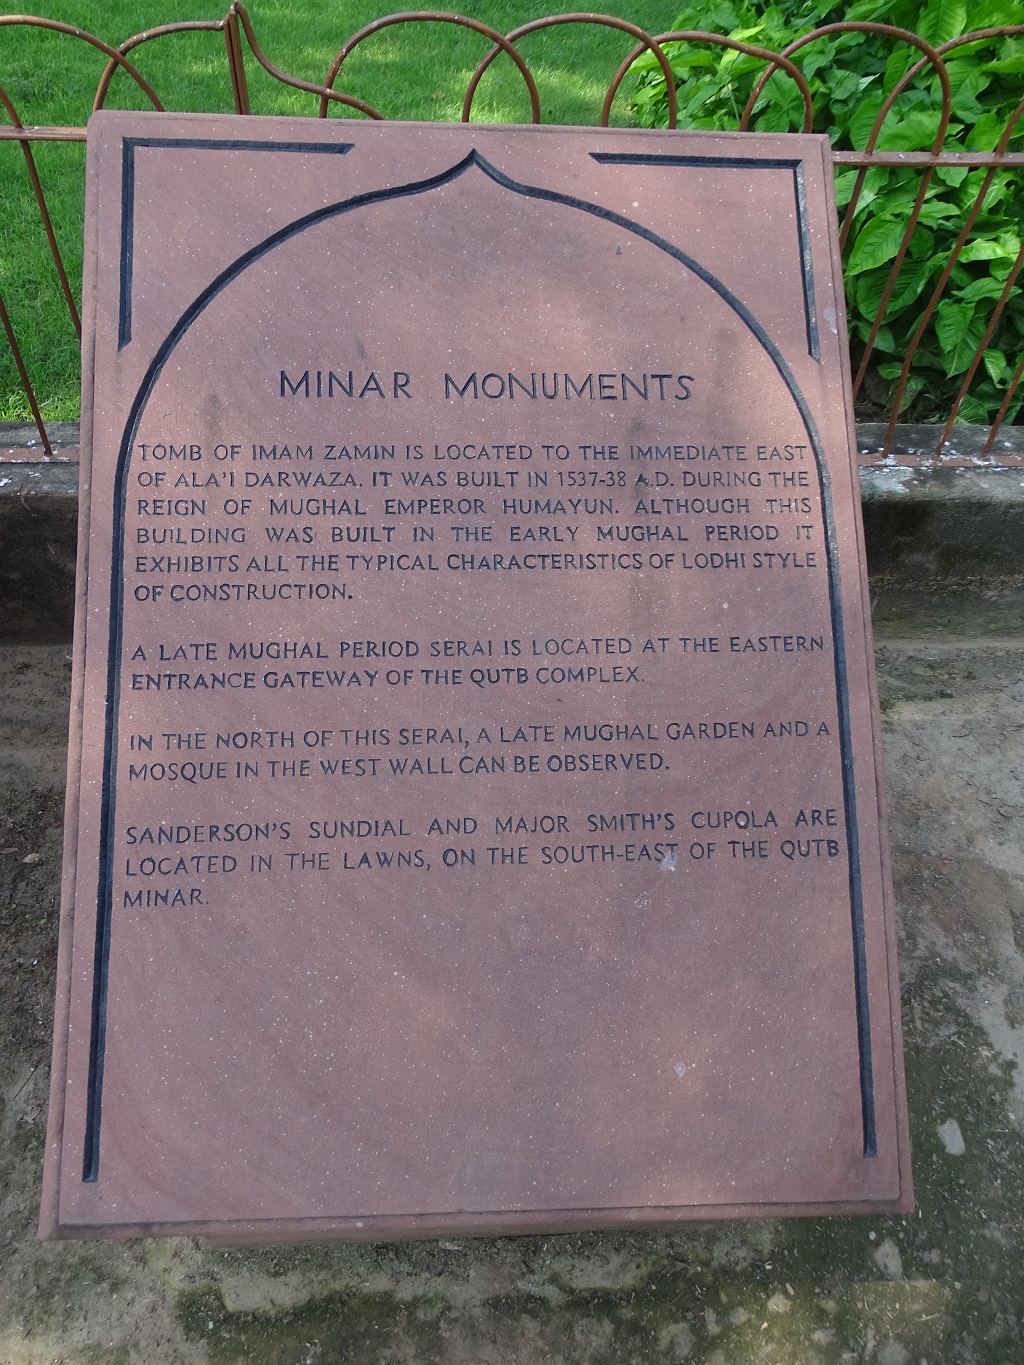 About: Minar Monuments at Qutb Complex